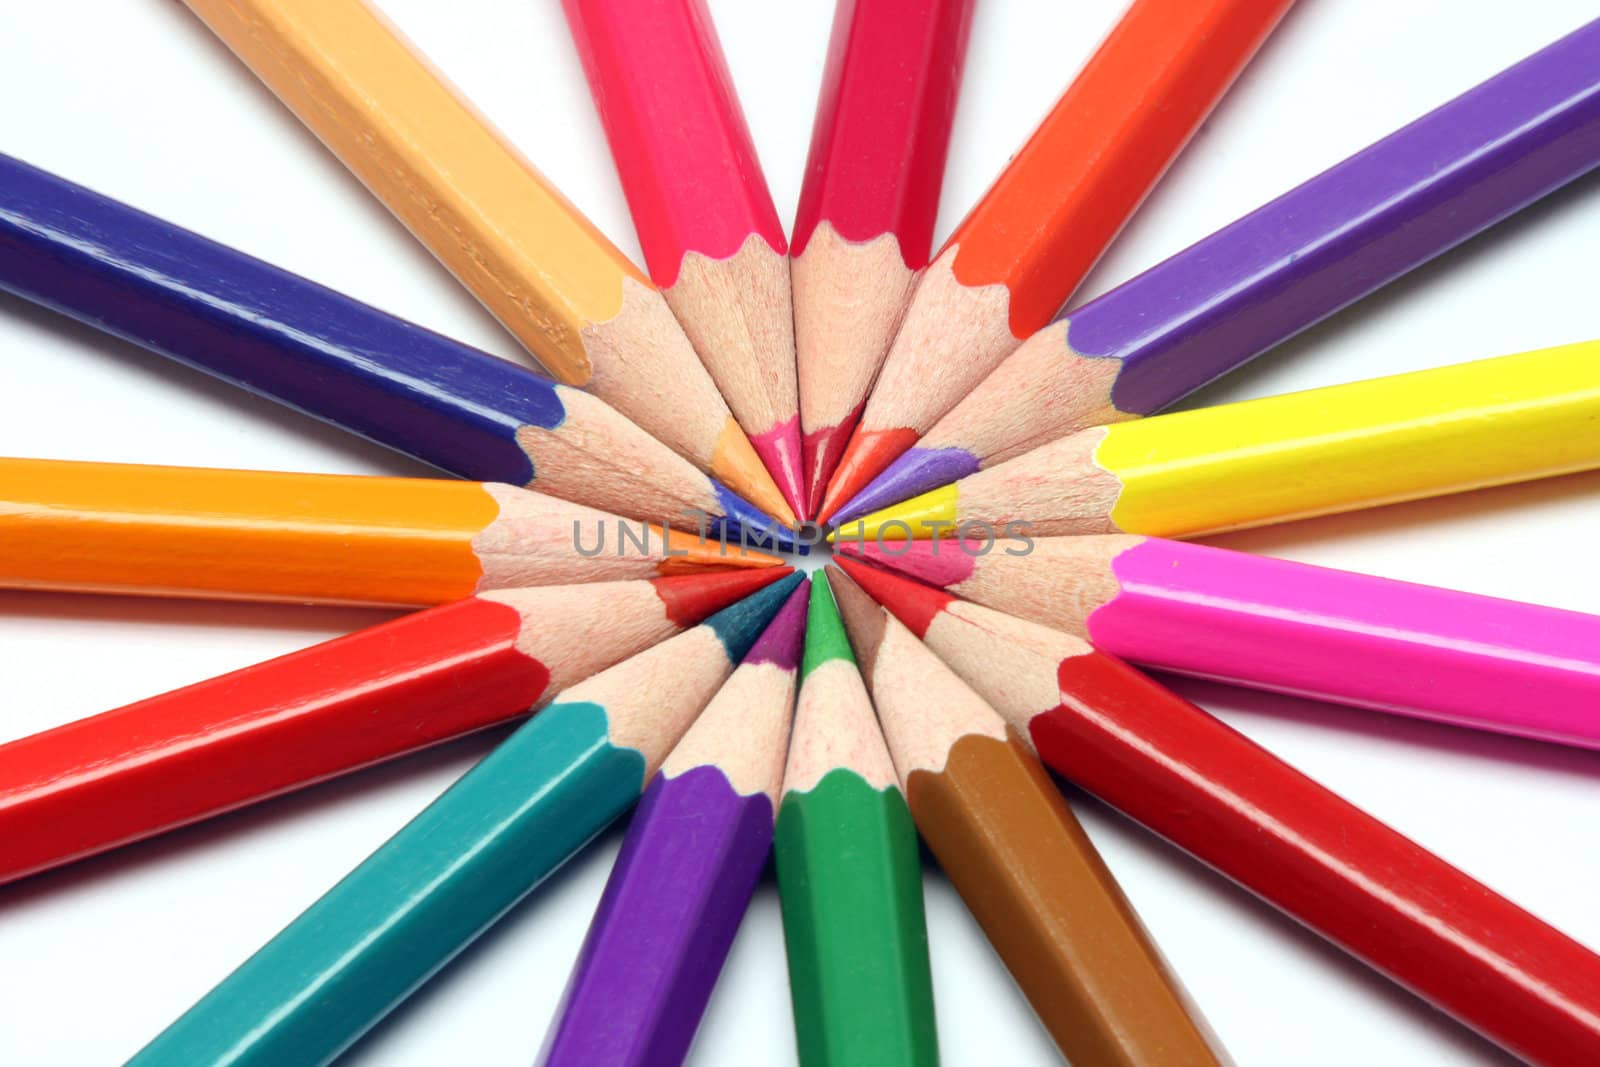 pencils sharpened in a cirle color assortment on white backgroud